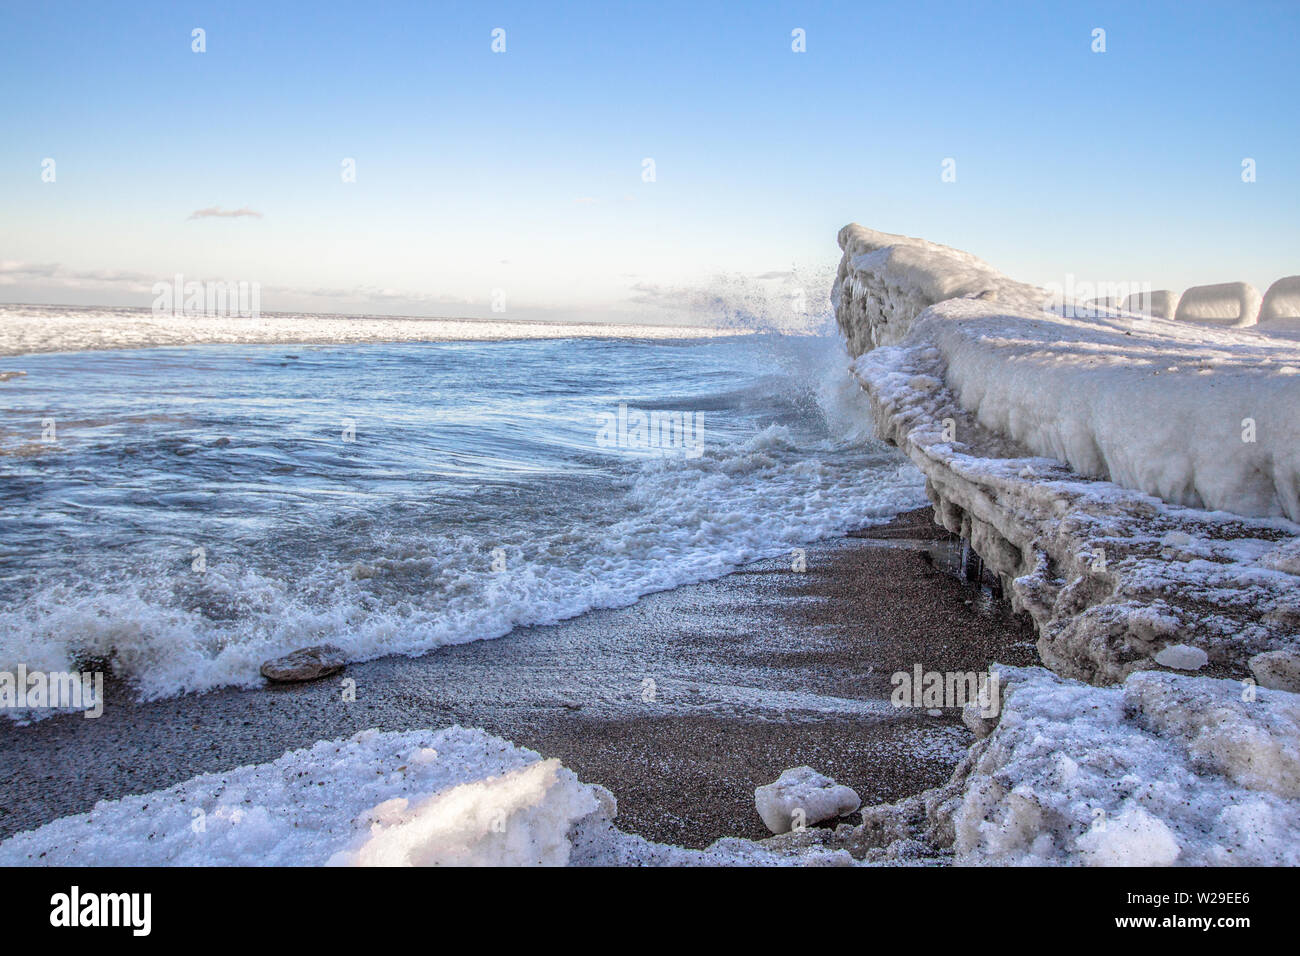 Winter On The Great Lakes. Ice on the frozen Great Lakes as waves splash on the coast on a cold winter morning. Port Sanilac, Michigan Stock Photo